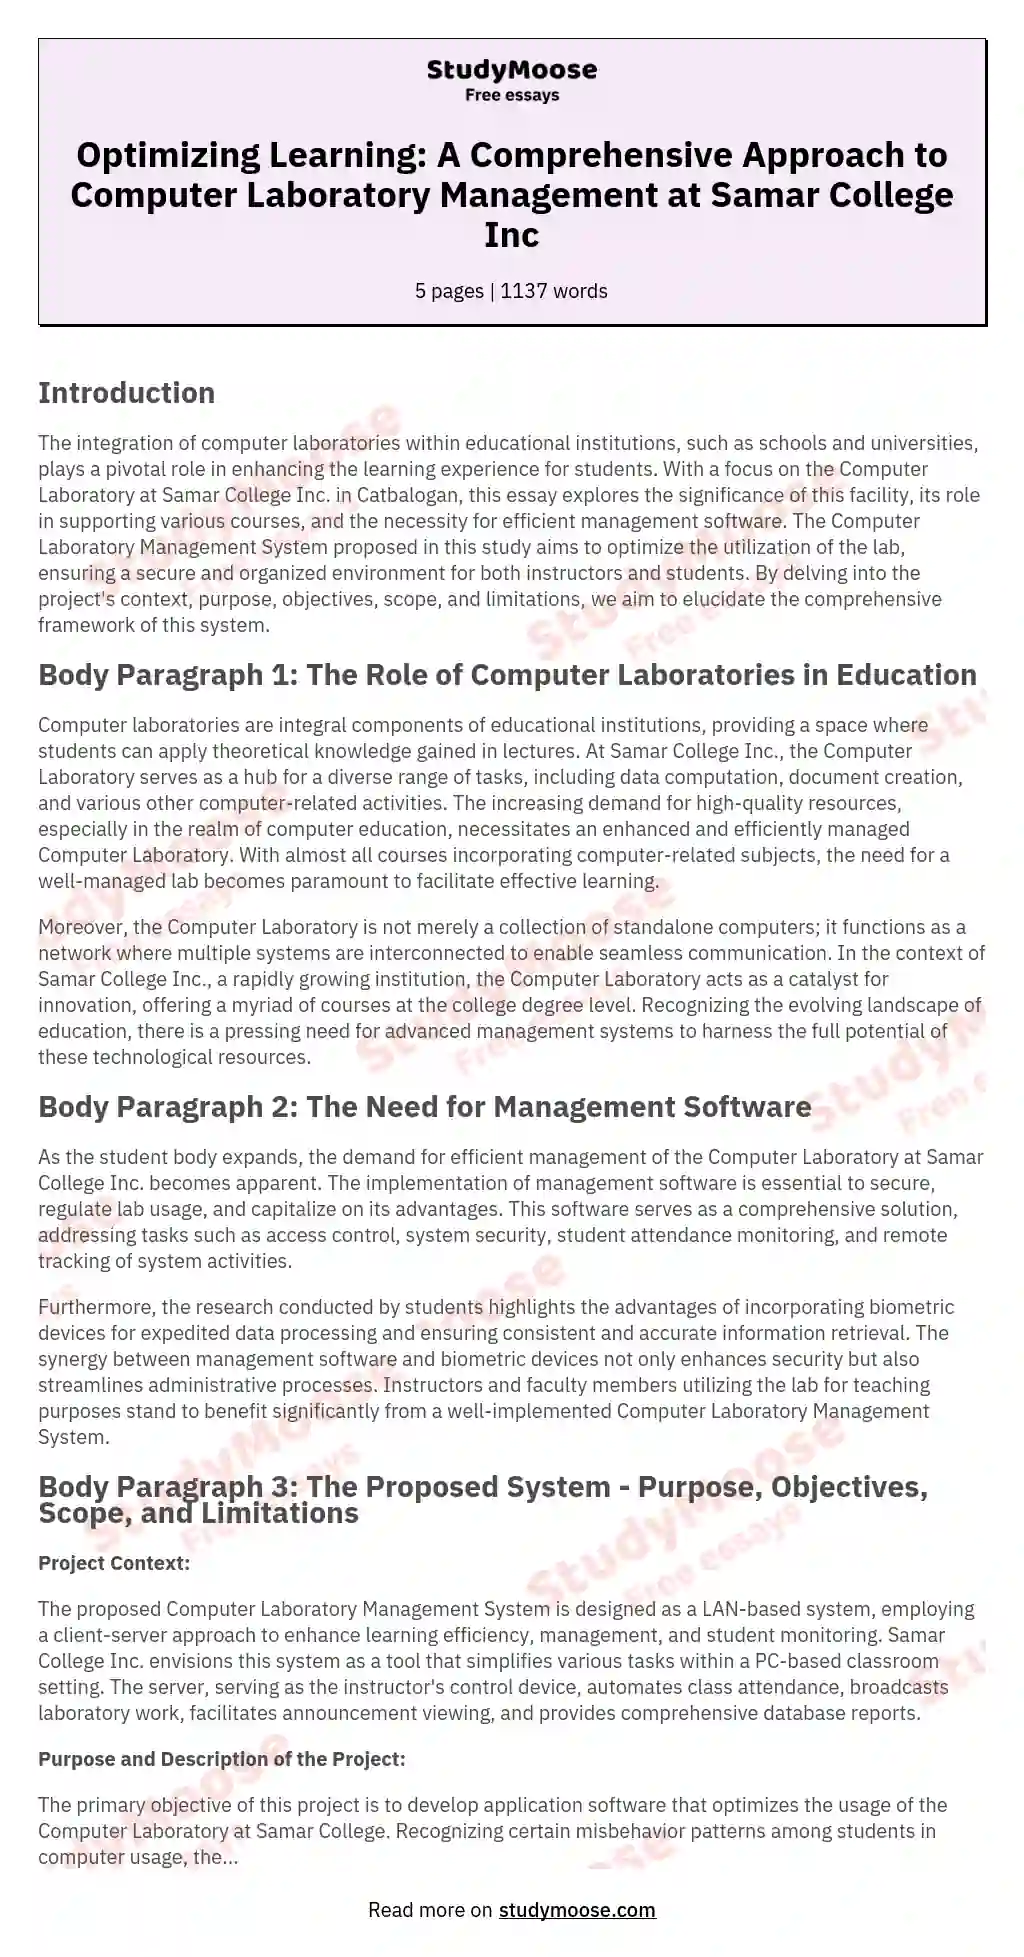 Optimizing Learning: A Comprehensive Approach to Computer Laboratory Management at Samar College Inc essay